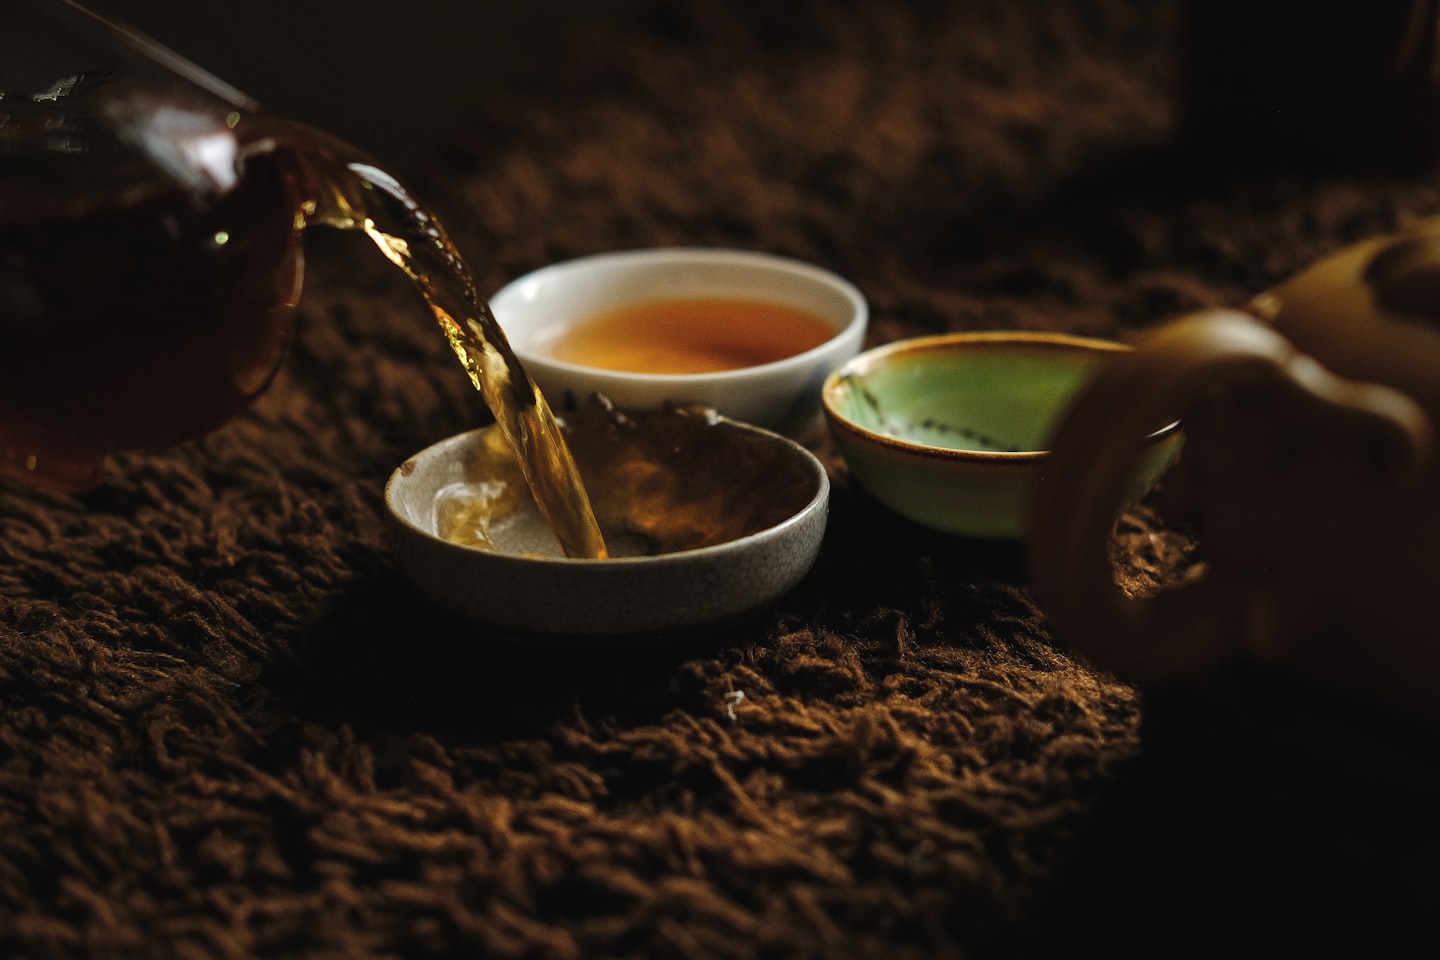 Cover Image for Fine Tea Tasting (members and +1's only)